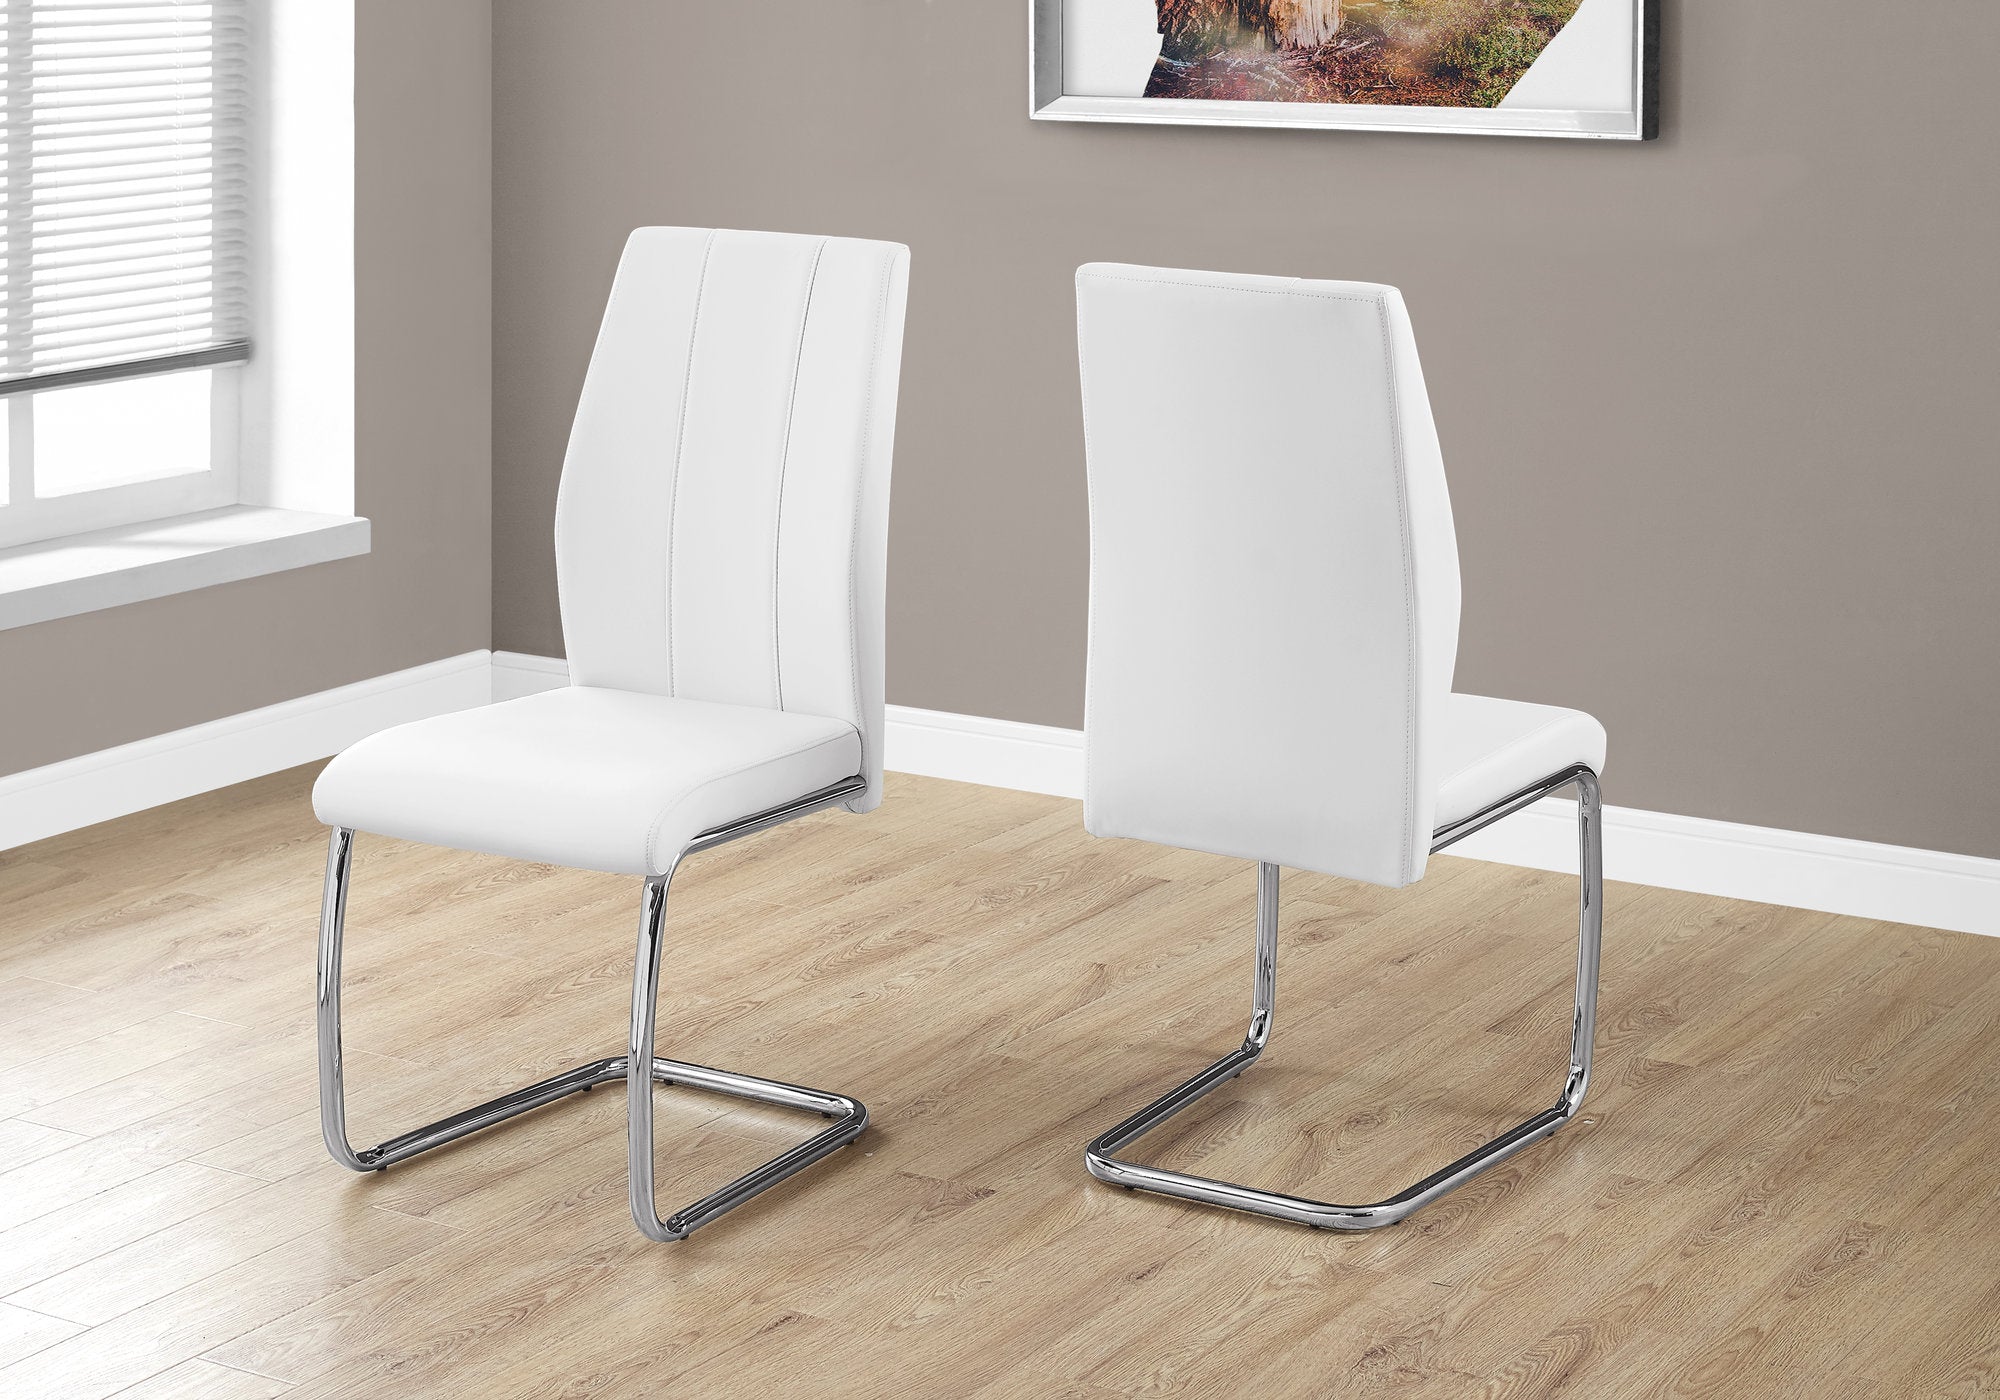 MN-391075    Dining Chair, Set Of 2, Side, Pu Leather-Look, Upholstered, Metal Legs, Kitchen, Dining Room, Velvet, Metal Legs, White, Chrome, Contemporary, Modern